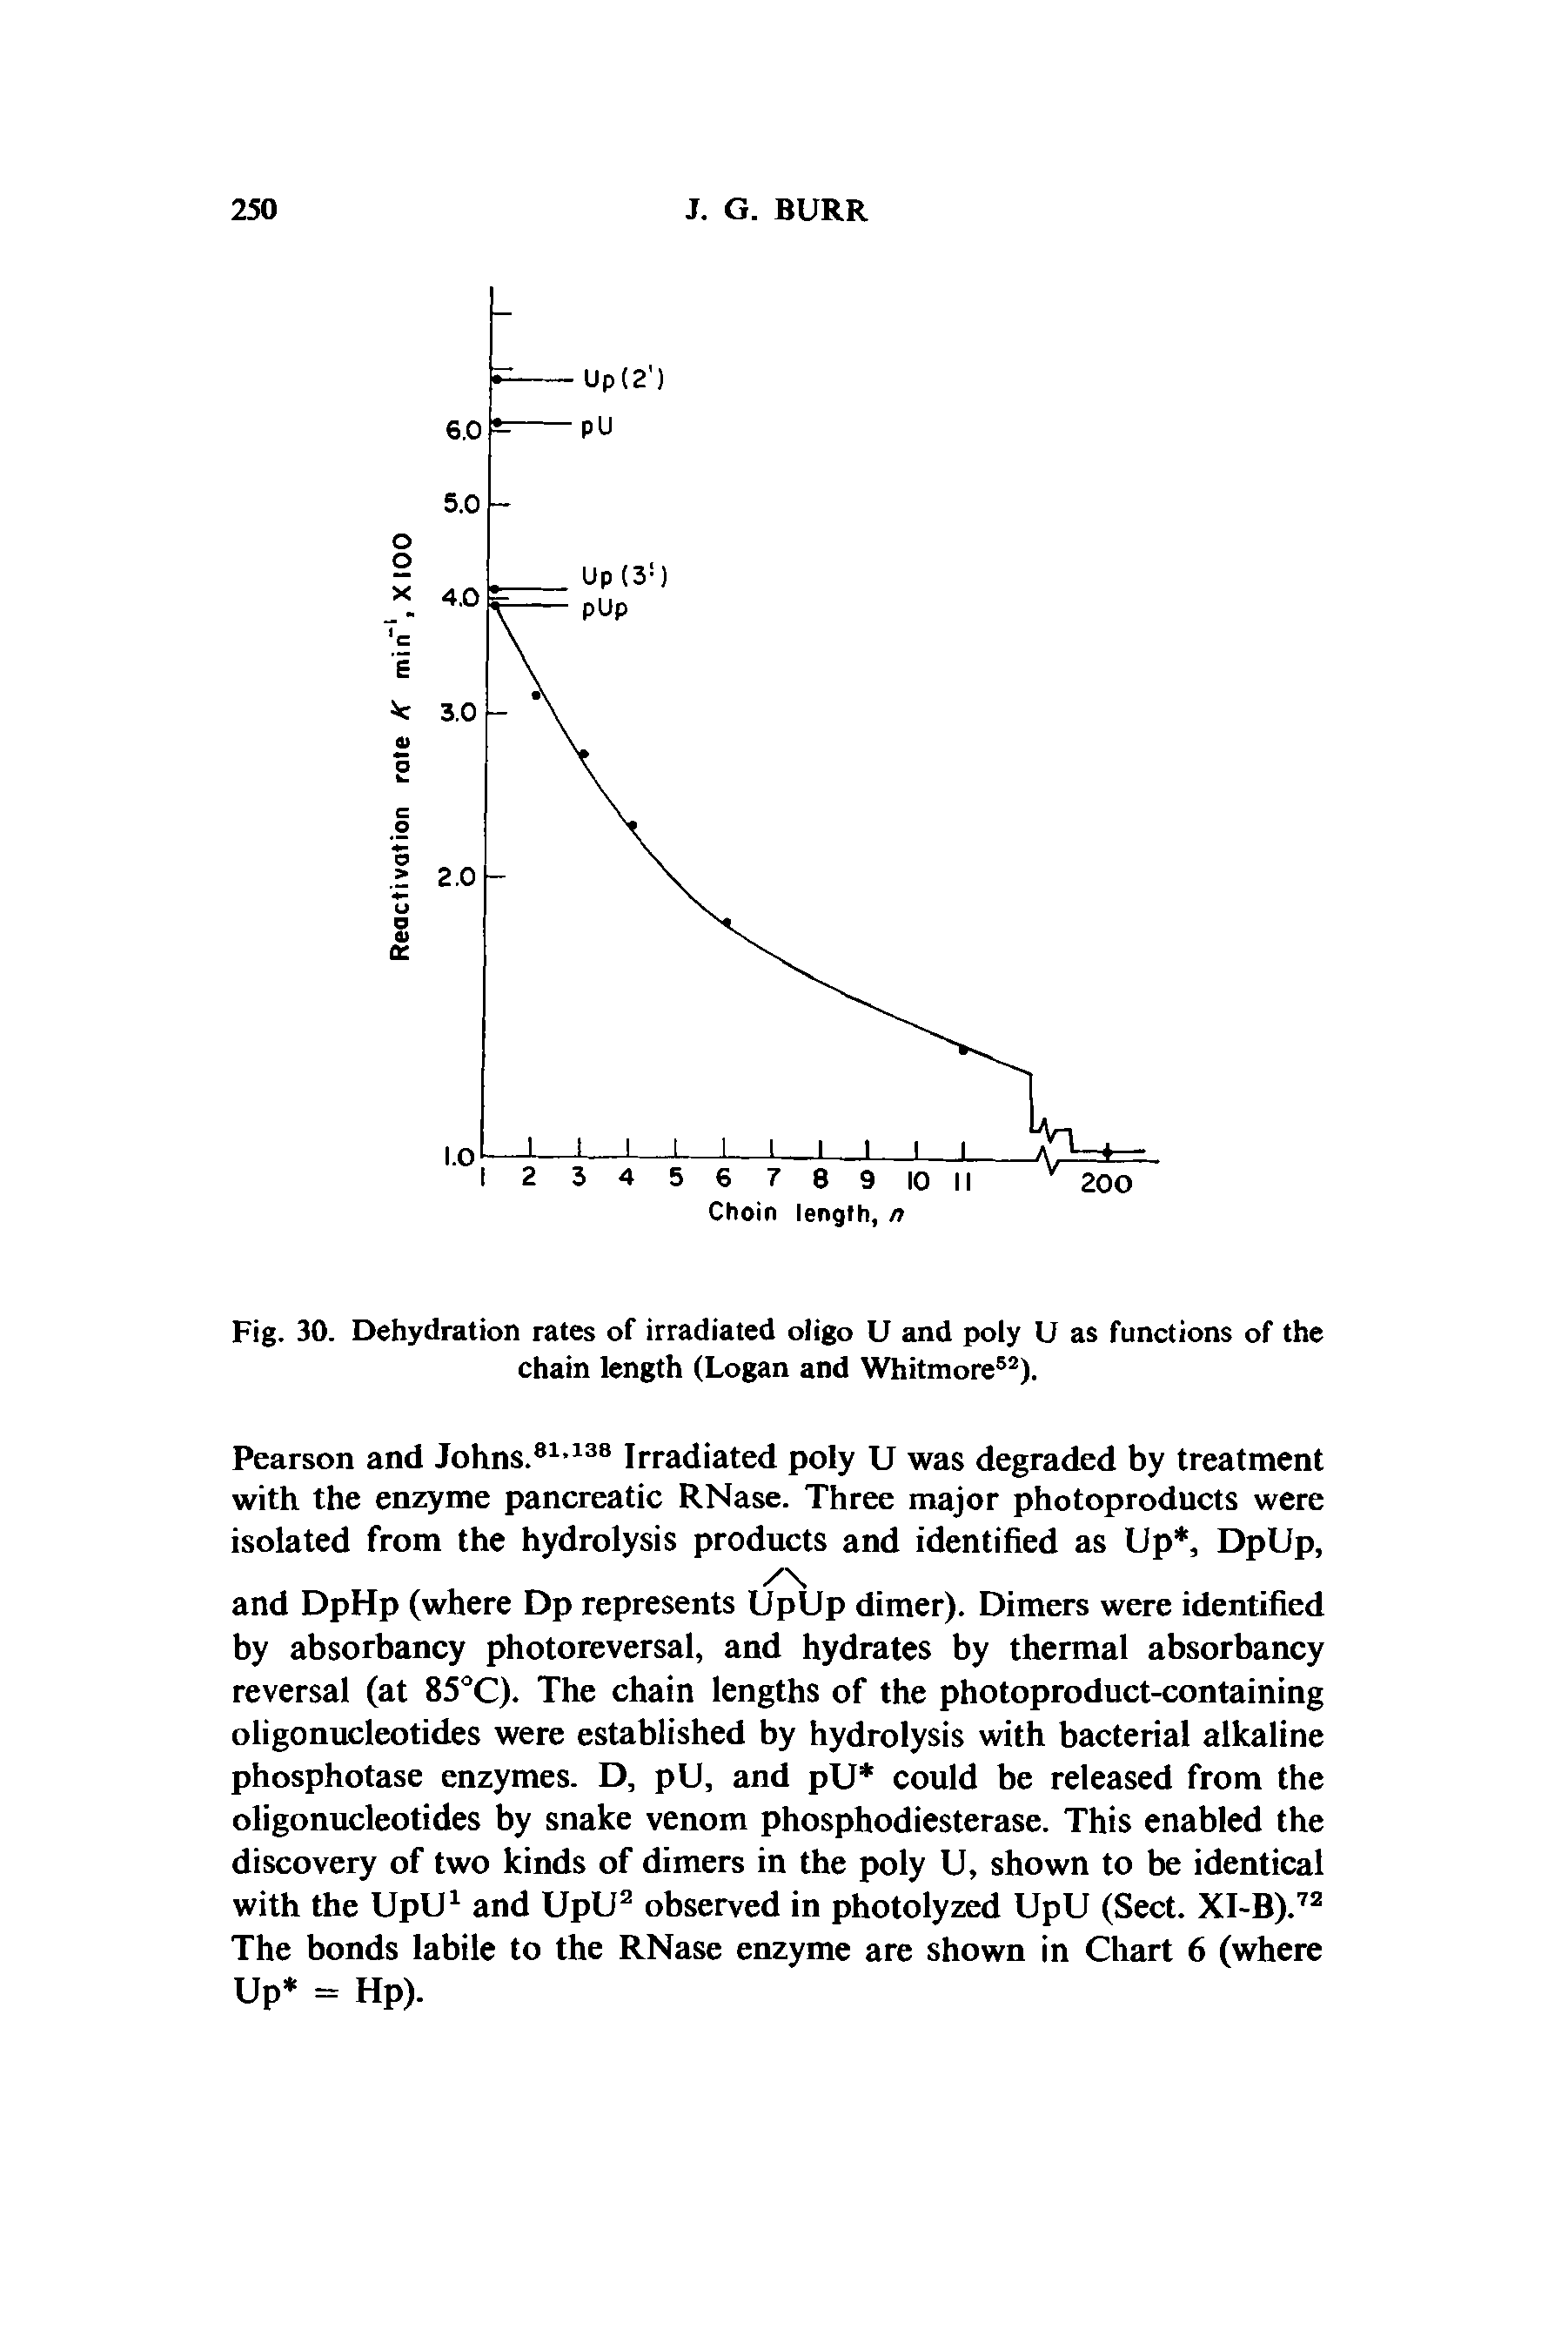 Fig. 30. Dehydration rates of irradiated oligo U and poly U as functions of the chain length (Logan and Whitmore52).